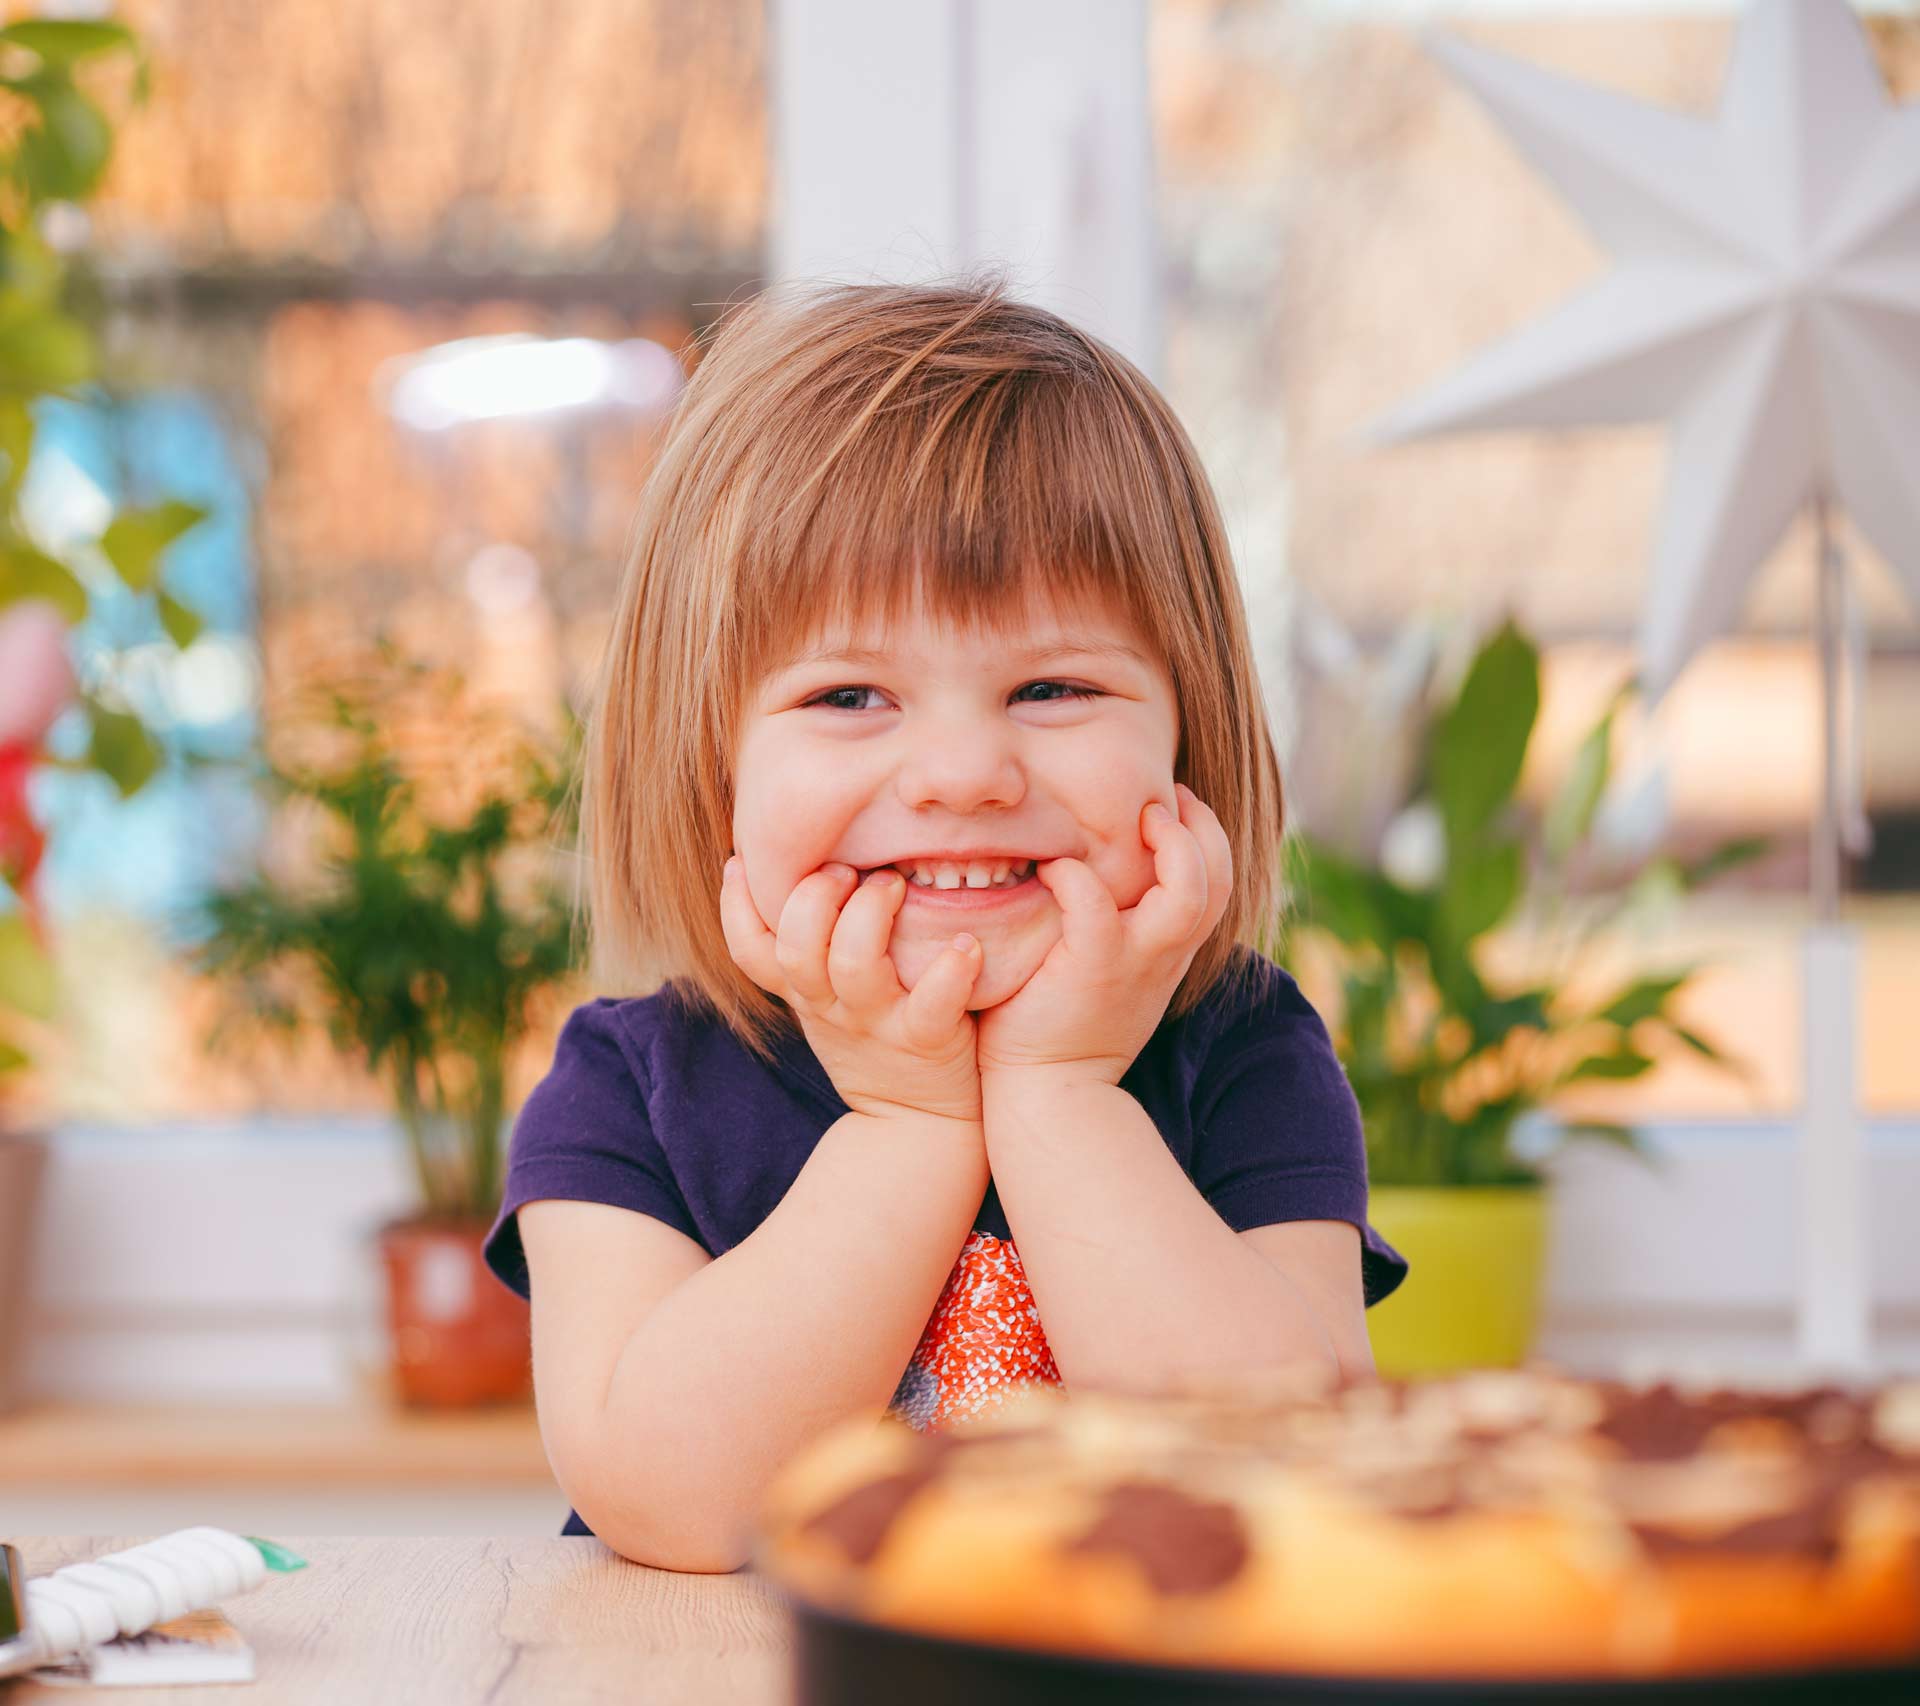 Child smiling sitting at a table with food